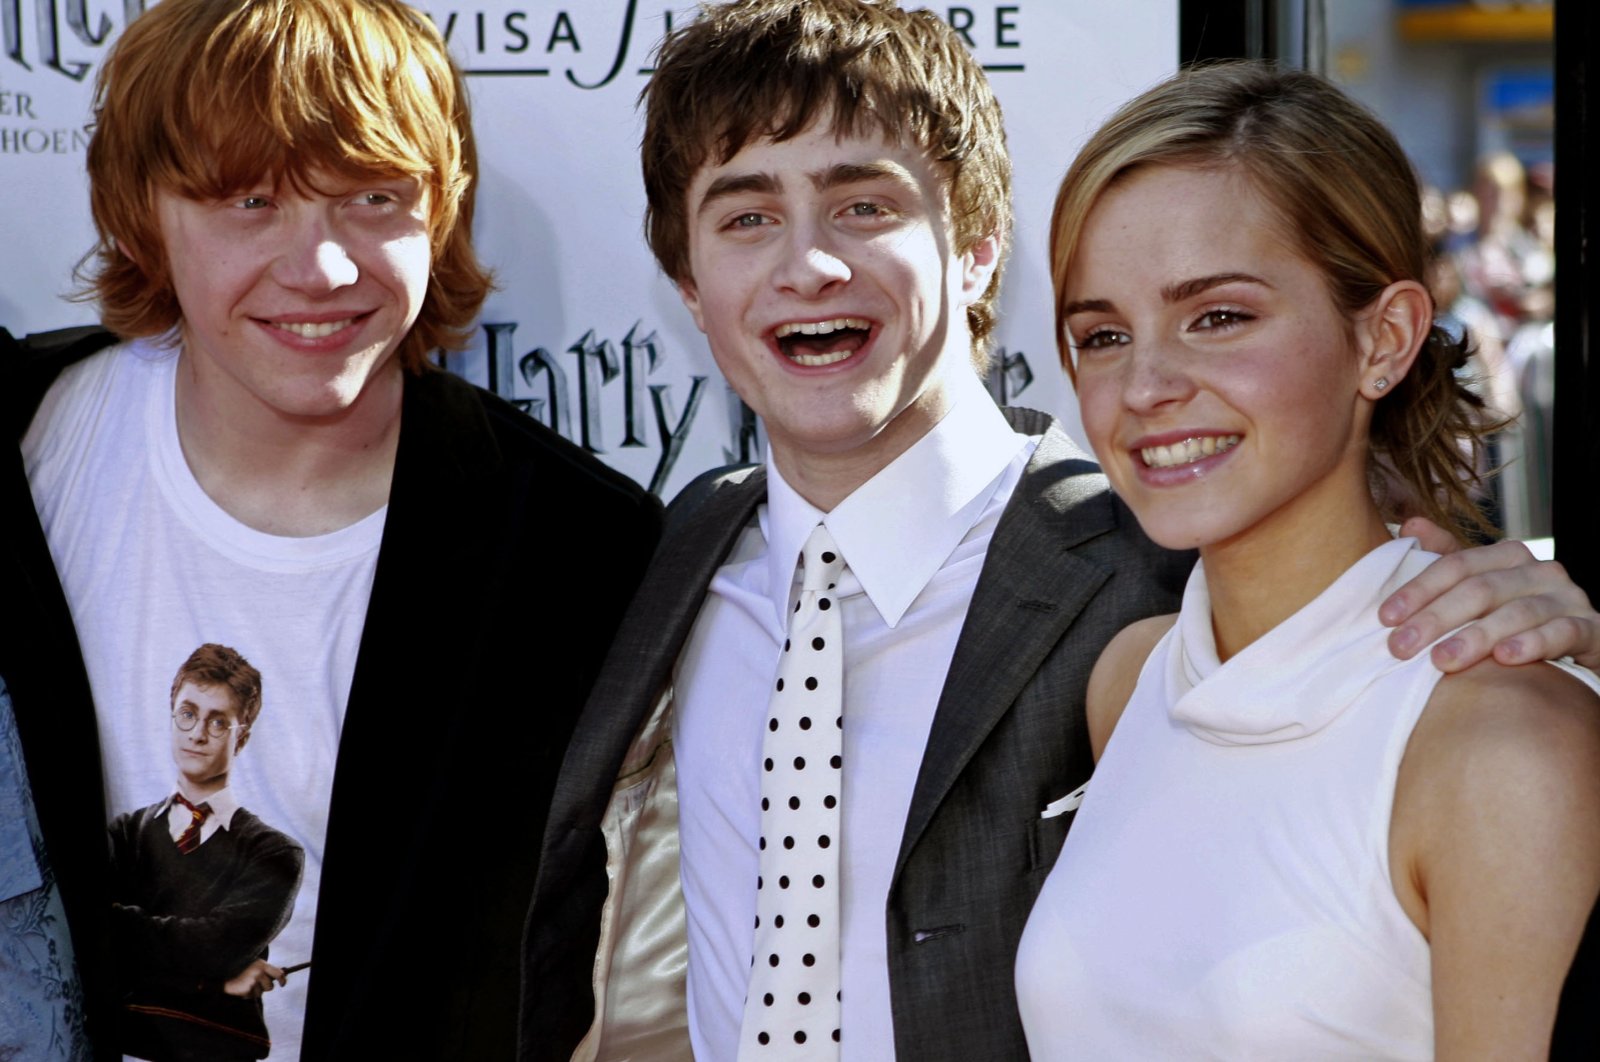 Rupert Grint (L), Daniel Radcliffe (M), and Emma Watson arrive at the premiere of &quot;Harry Potter and The Order of the Phoenix&quot; at Grauman&#039;s Chinese Theatre in Los Angeles, July 8, 2007. (AP Photo)